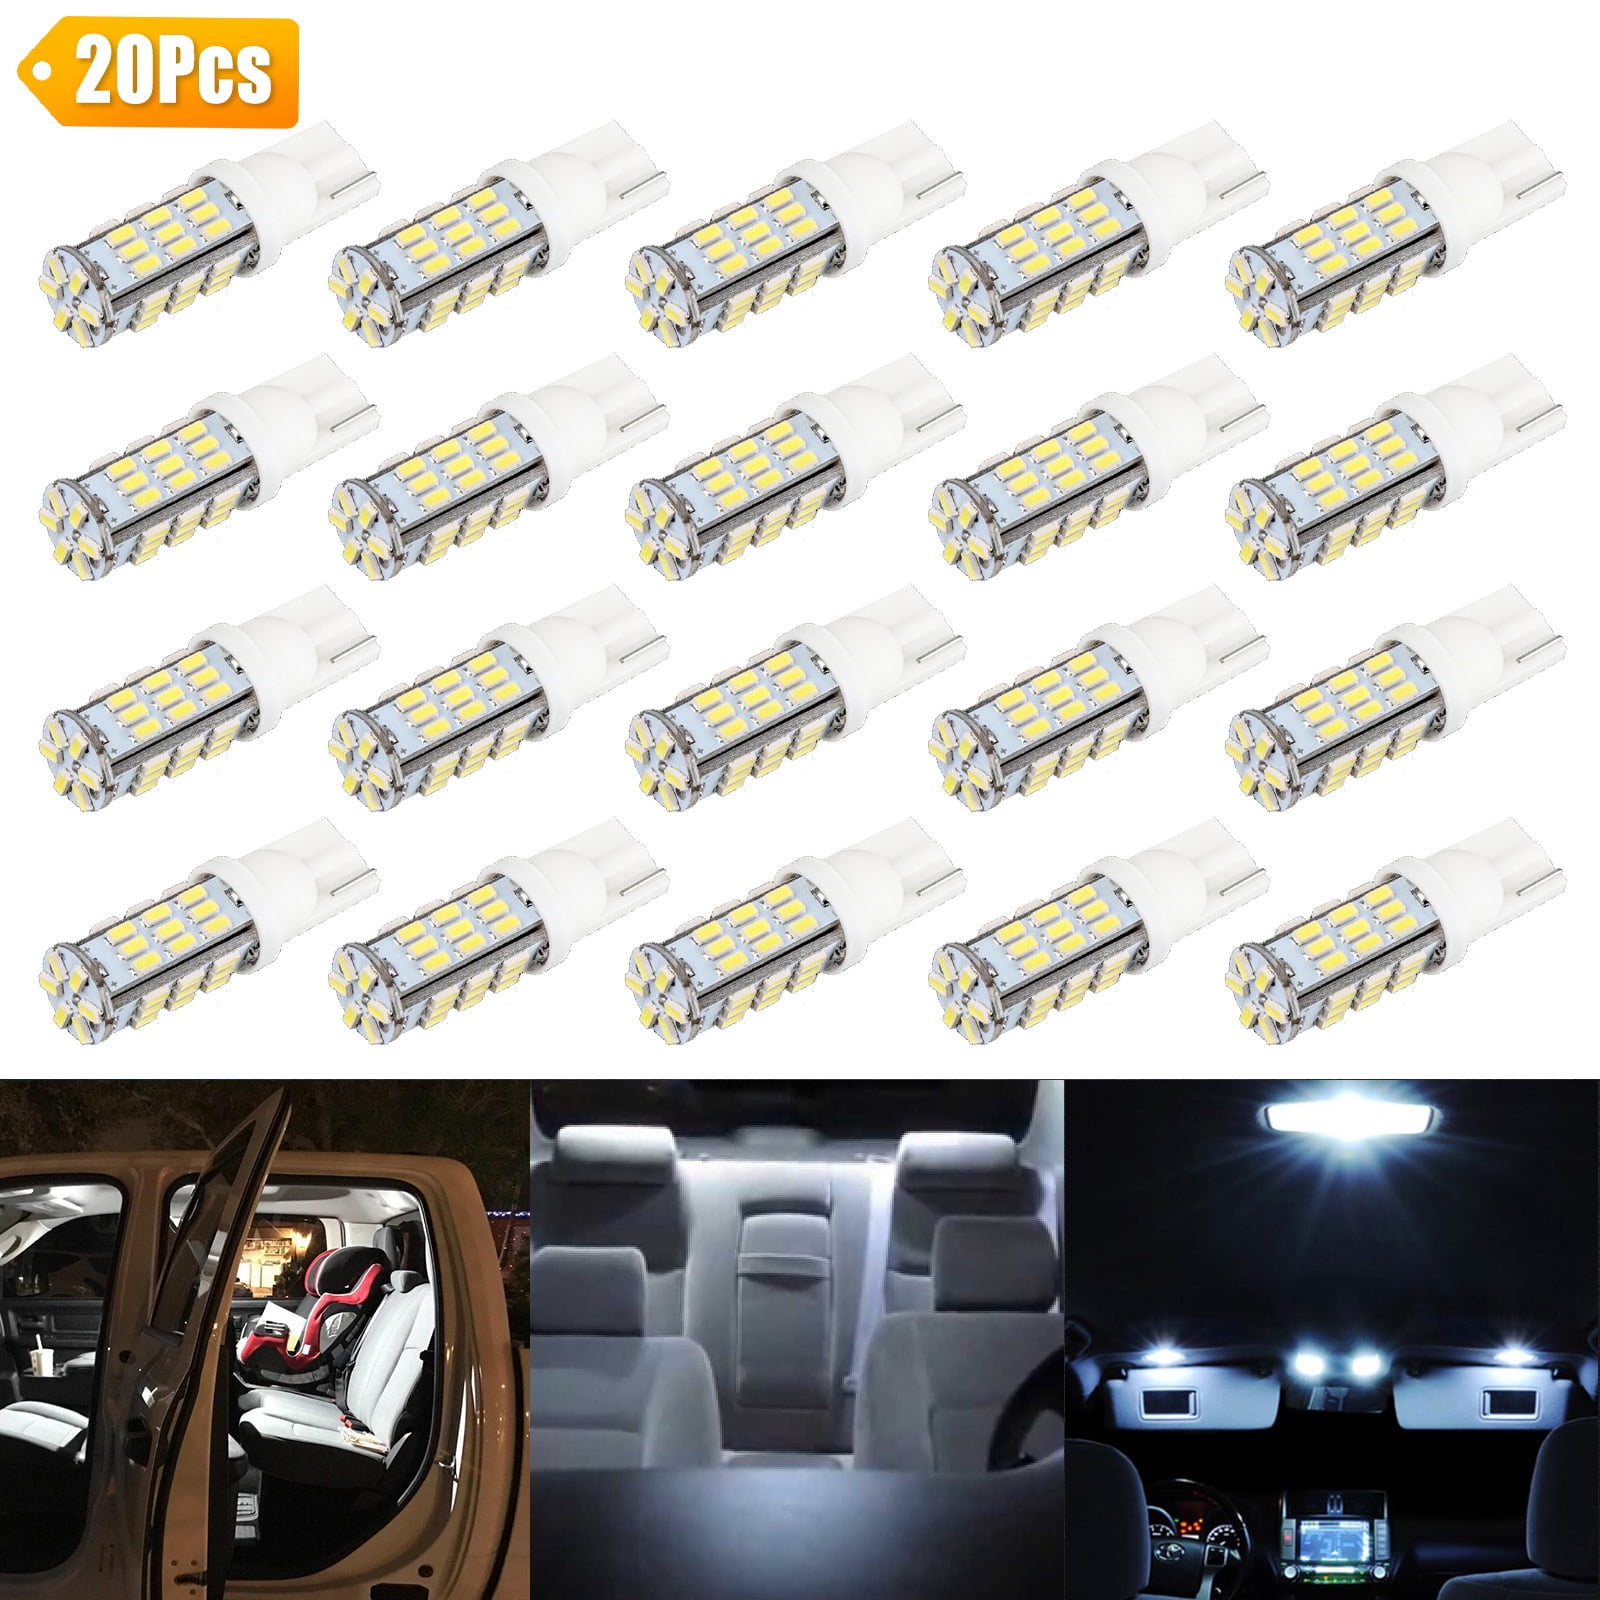 cciyu T10 912 921 906 4 Pack Super Bright SMD High Power LED Light Bulb Replacement fit for Backup Reverse Car SUV Pickup Truck bright white 